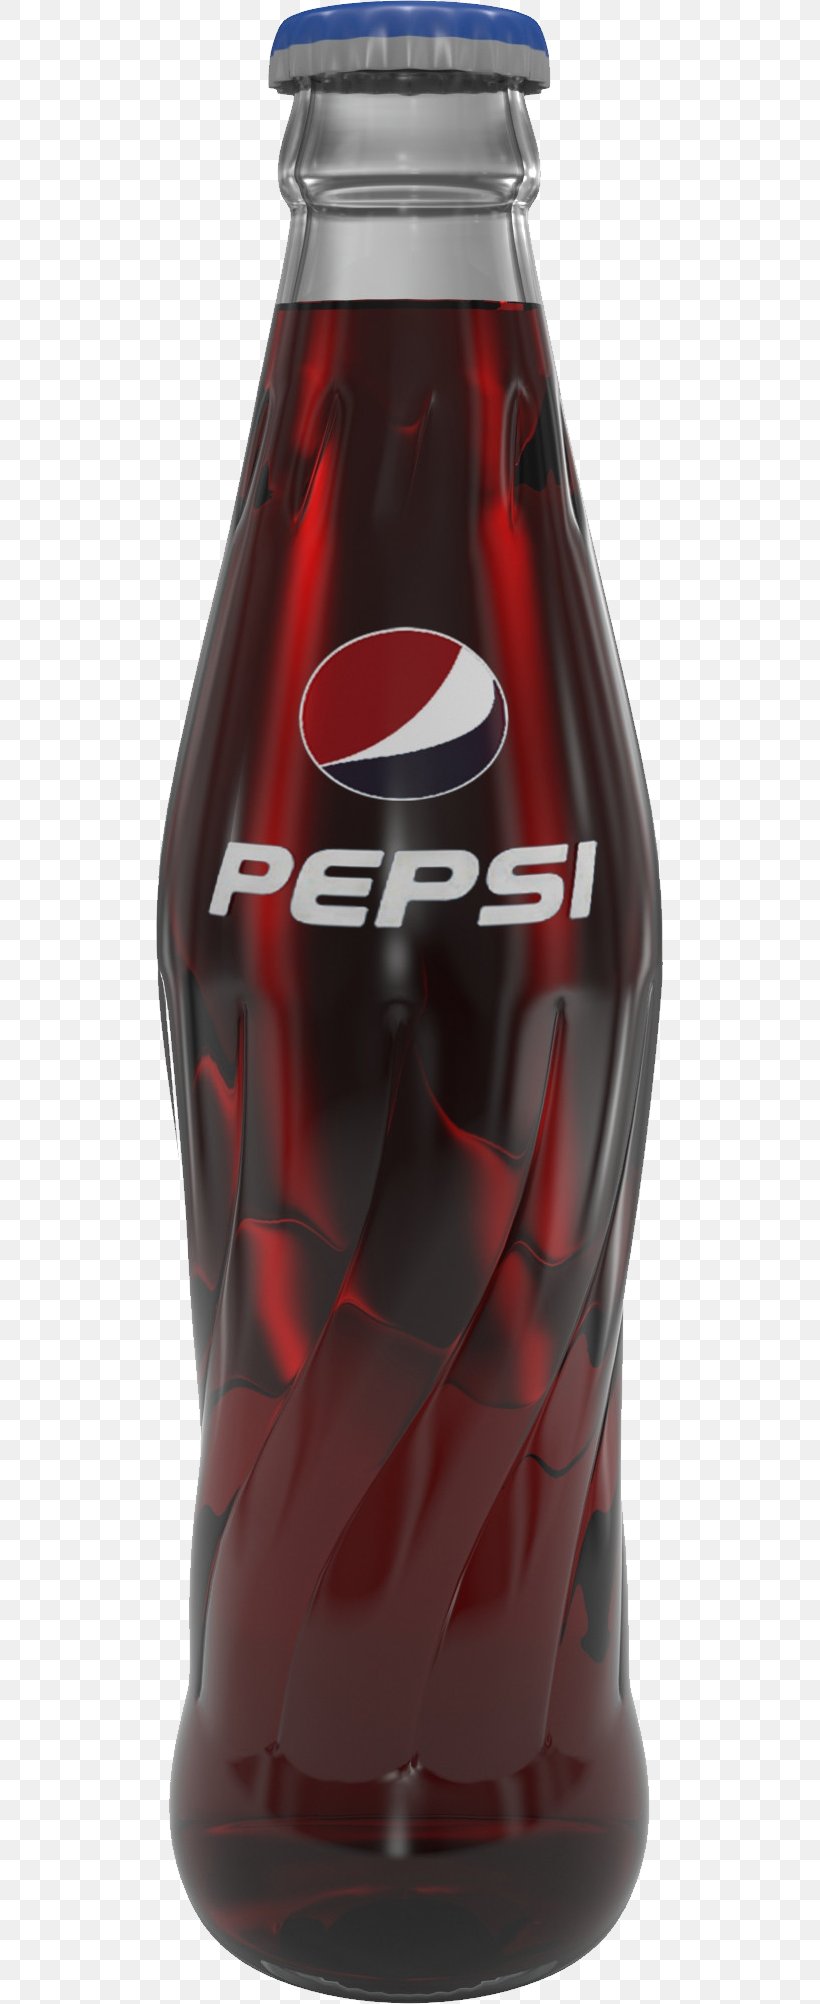 Fizzy Drinks Coca-Cola Pepsi Sprite, PNG, 508x2004px, Fizzy Drinks, Bottle, Caffeinefree Pepsi, Carbonated Soft Drinks, Cocacola Download Free